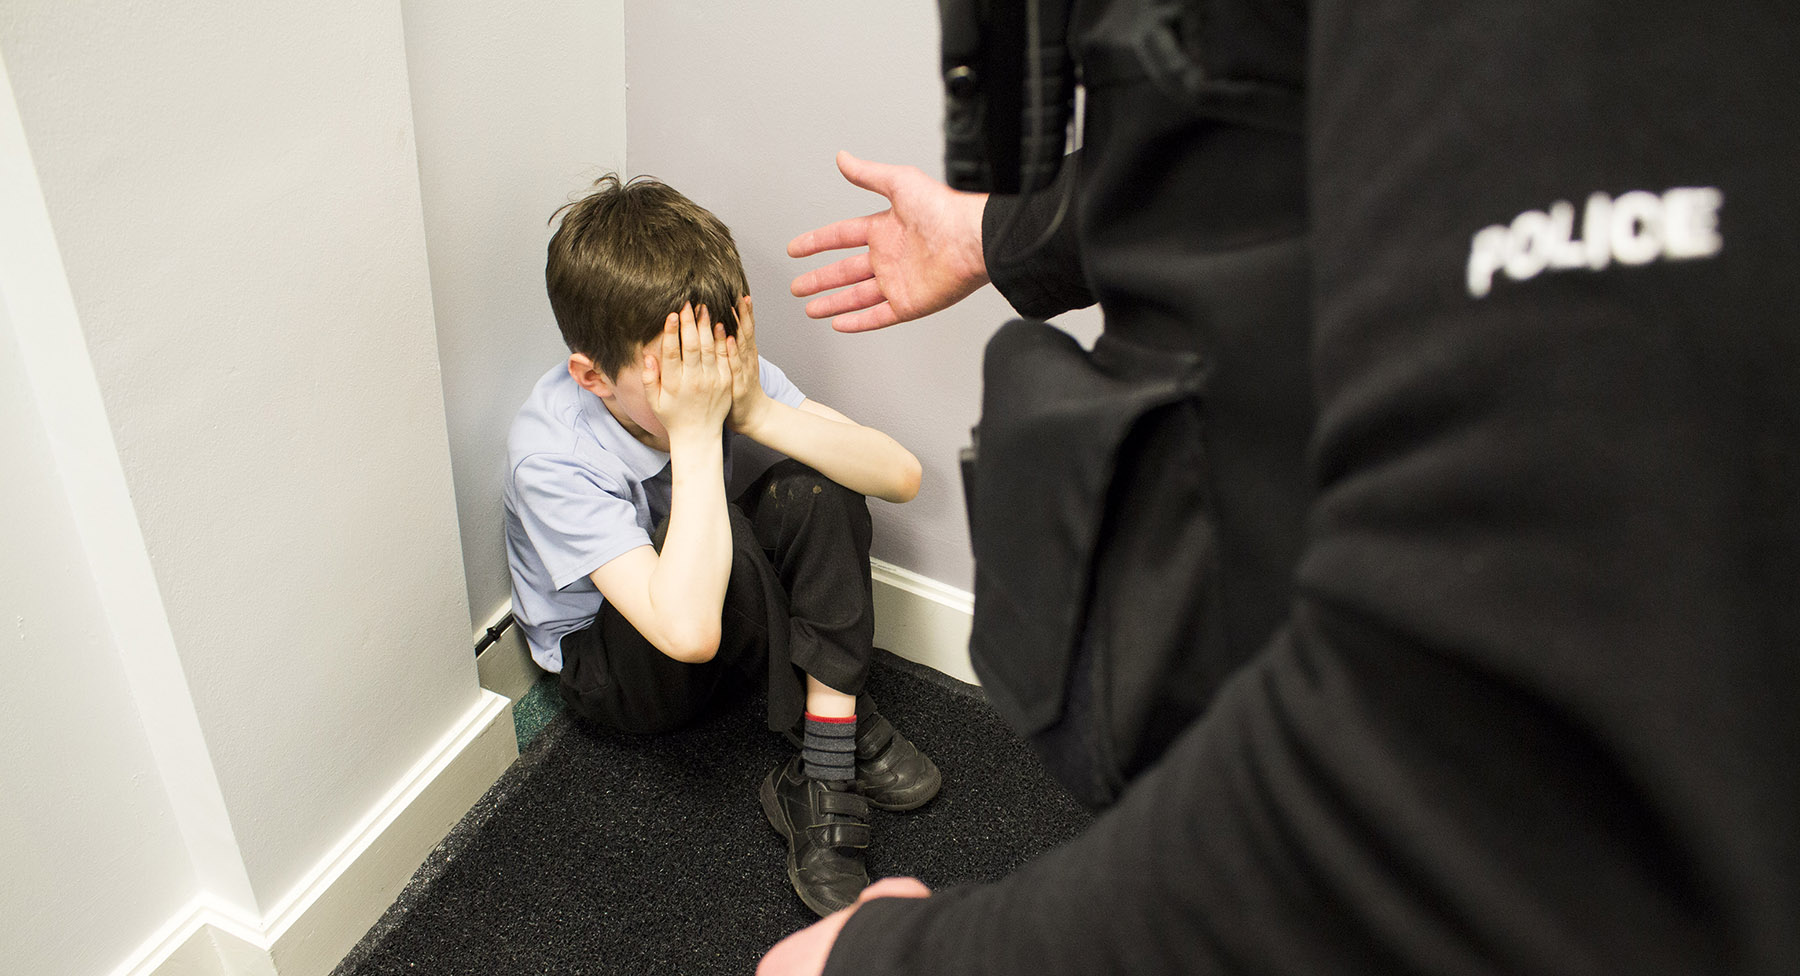 A boy sat crossed legged in the corner with a police with an outstretched arm